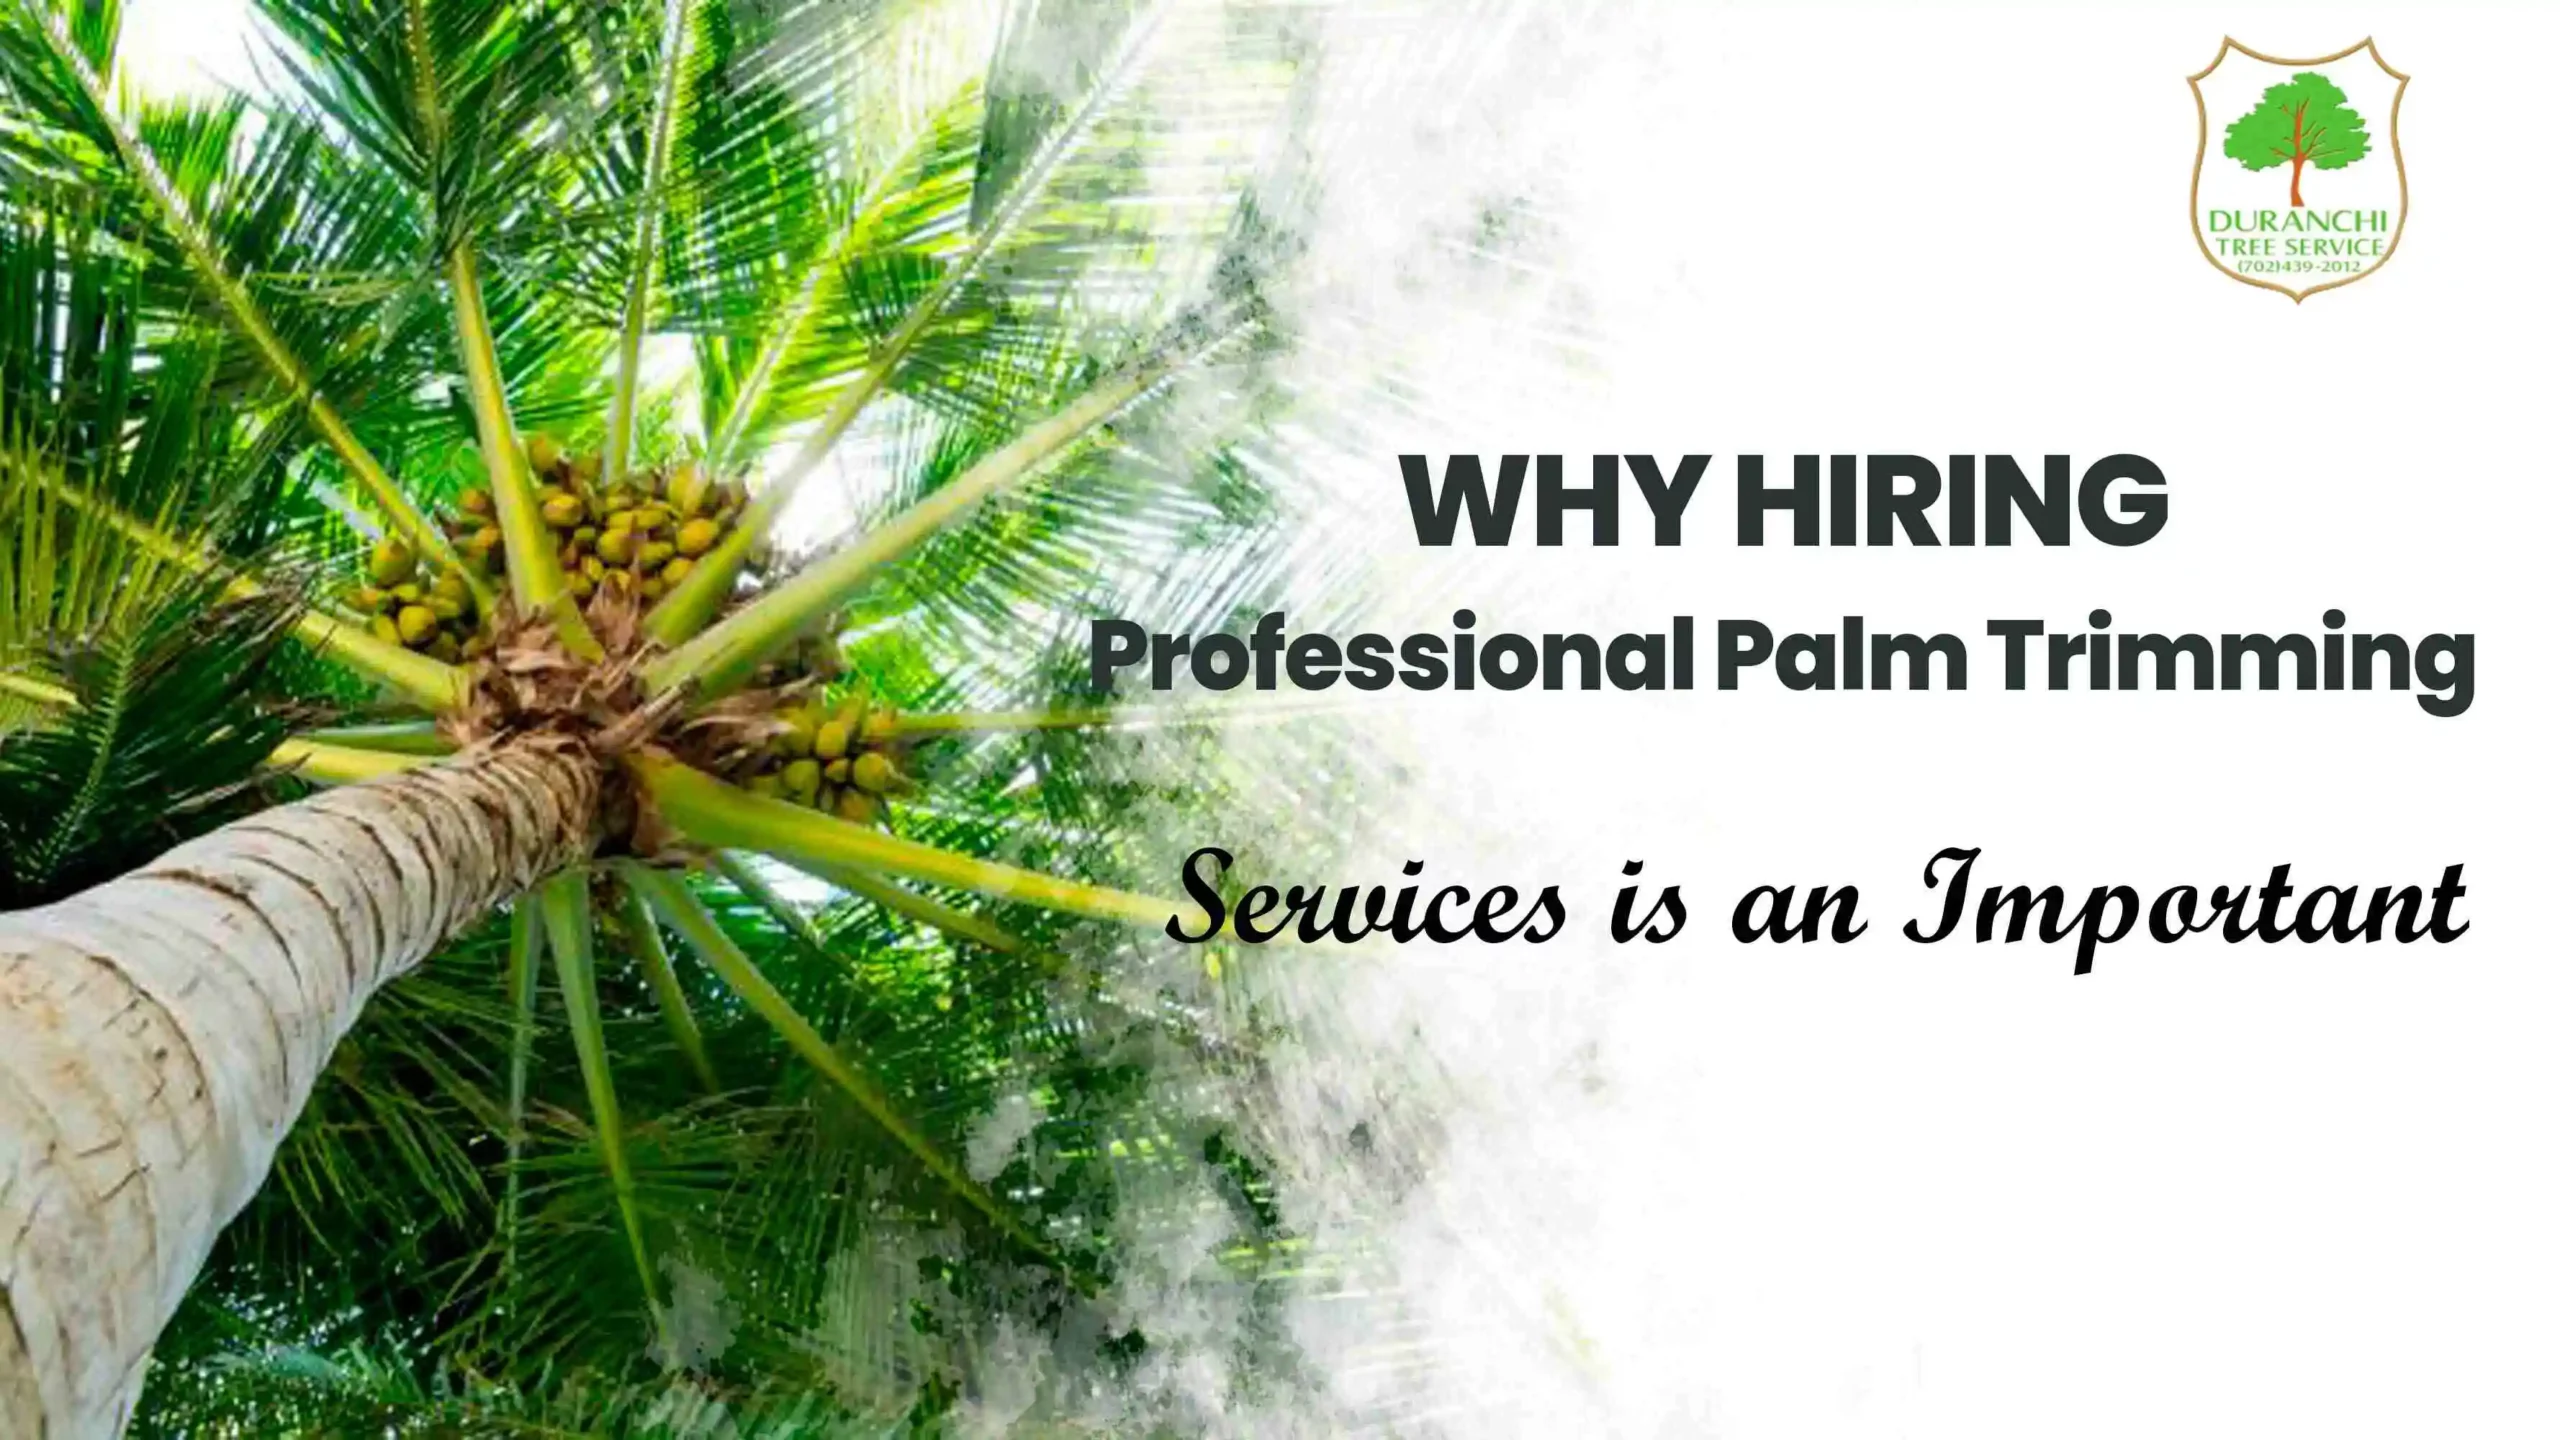 Why Hiring Professional Palm Trimming Services is an Important